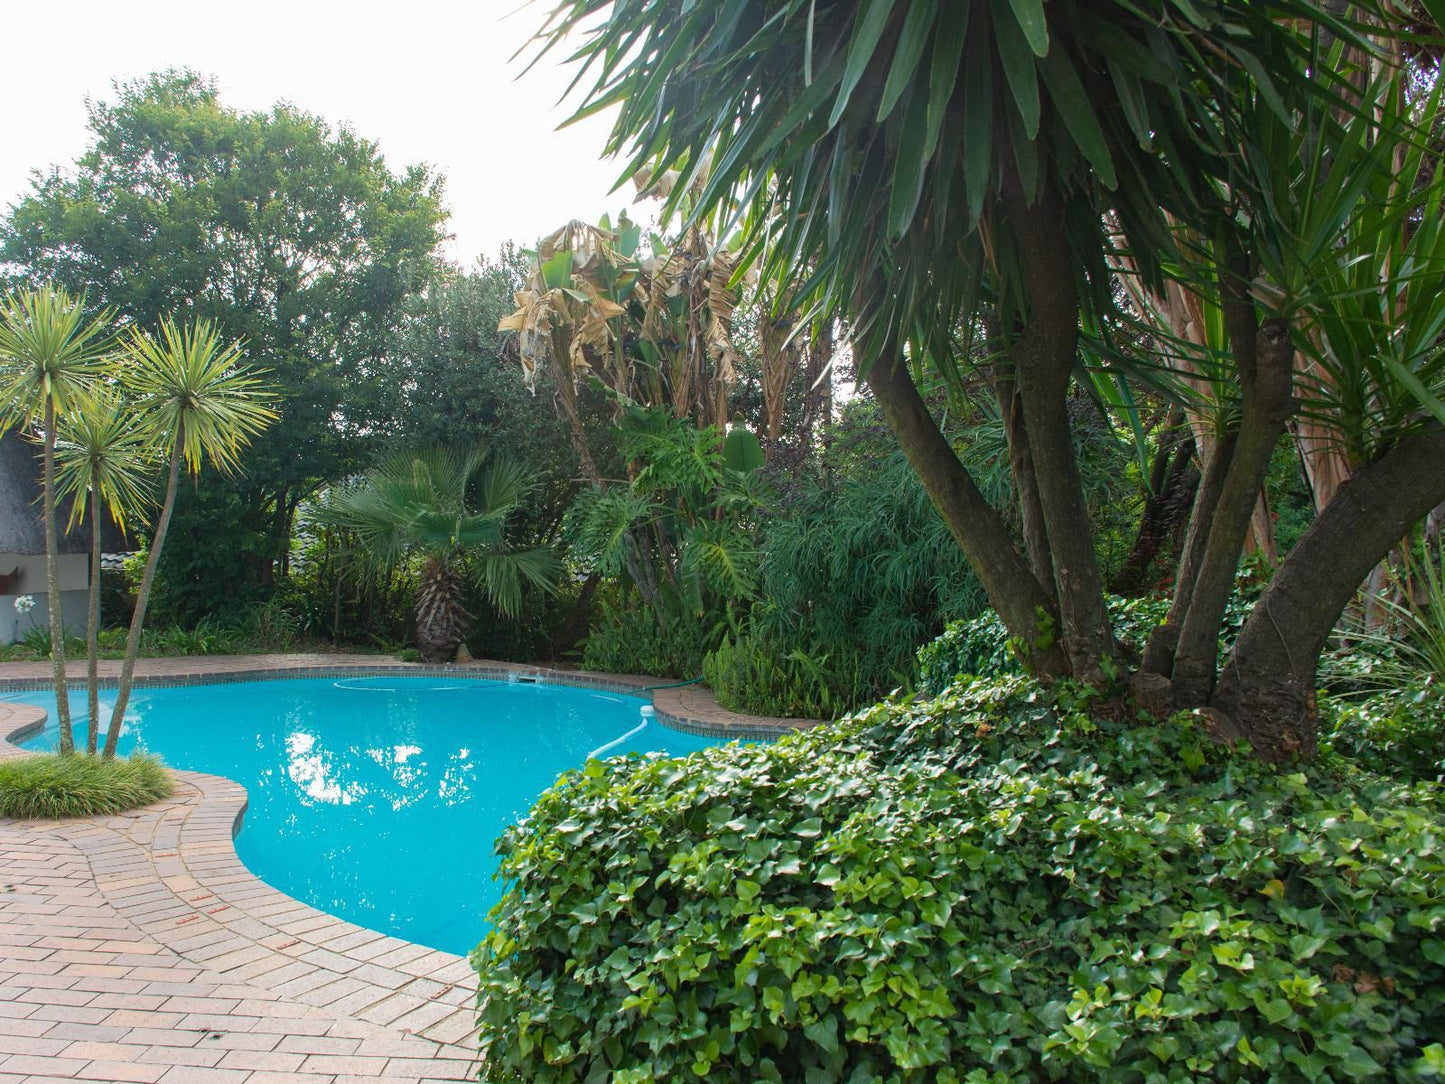 The Cube Zwelakho Luxury Apartments Rivonia Johannesburg Gauteng South Africa Palm Tree, Plant, Nature, Wood, Garden, Swimming Pool